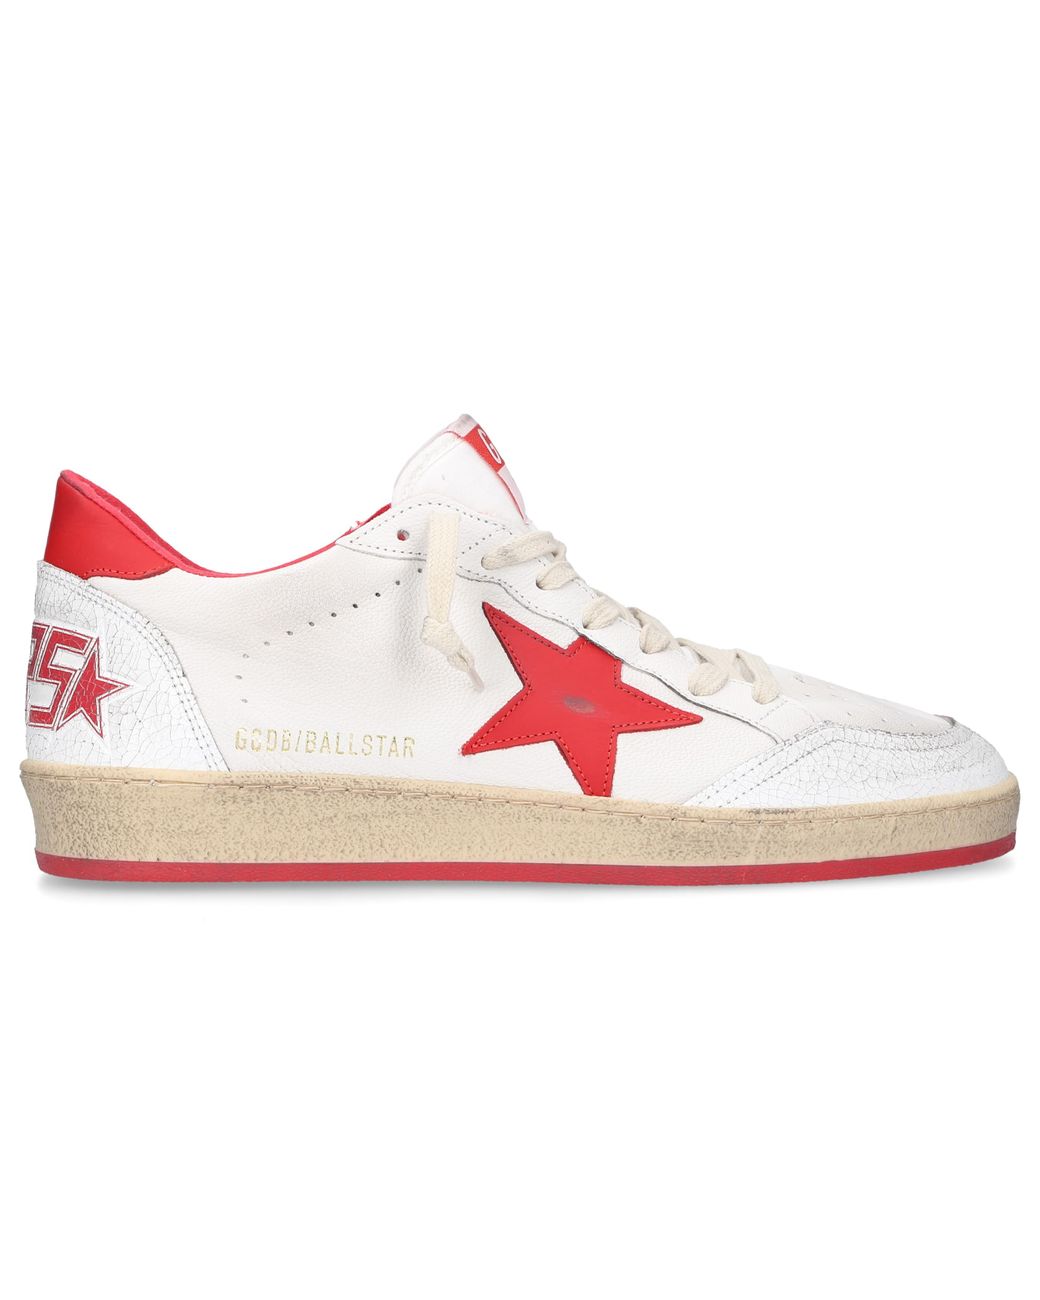 Golden Goose Deluxe Brand Leather Sneakers Red Ball Star in White,Red ...